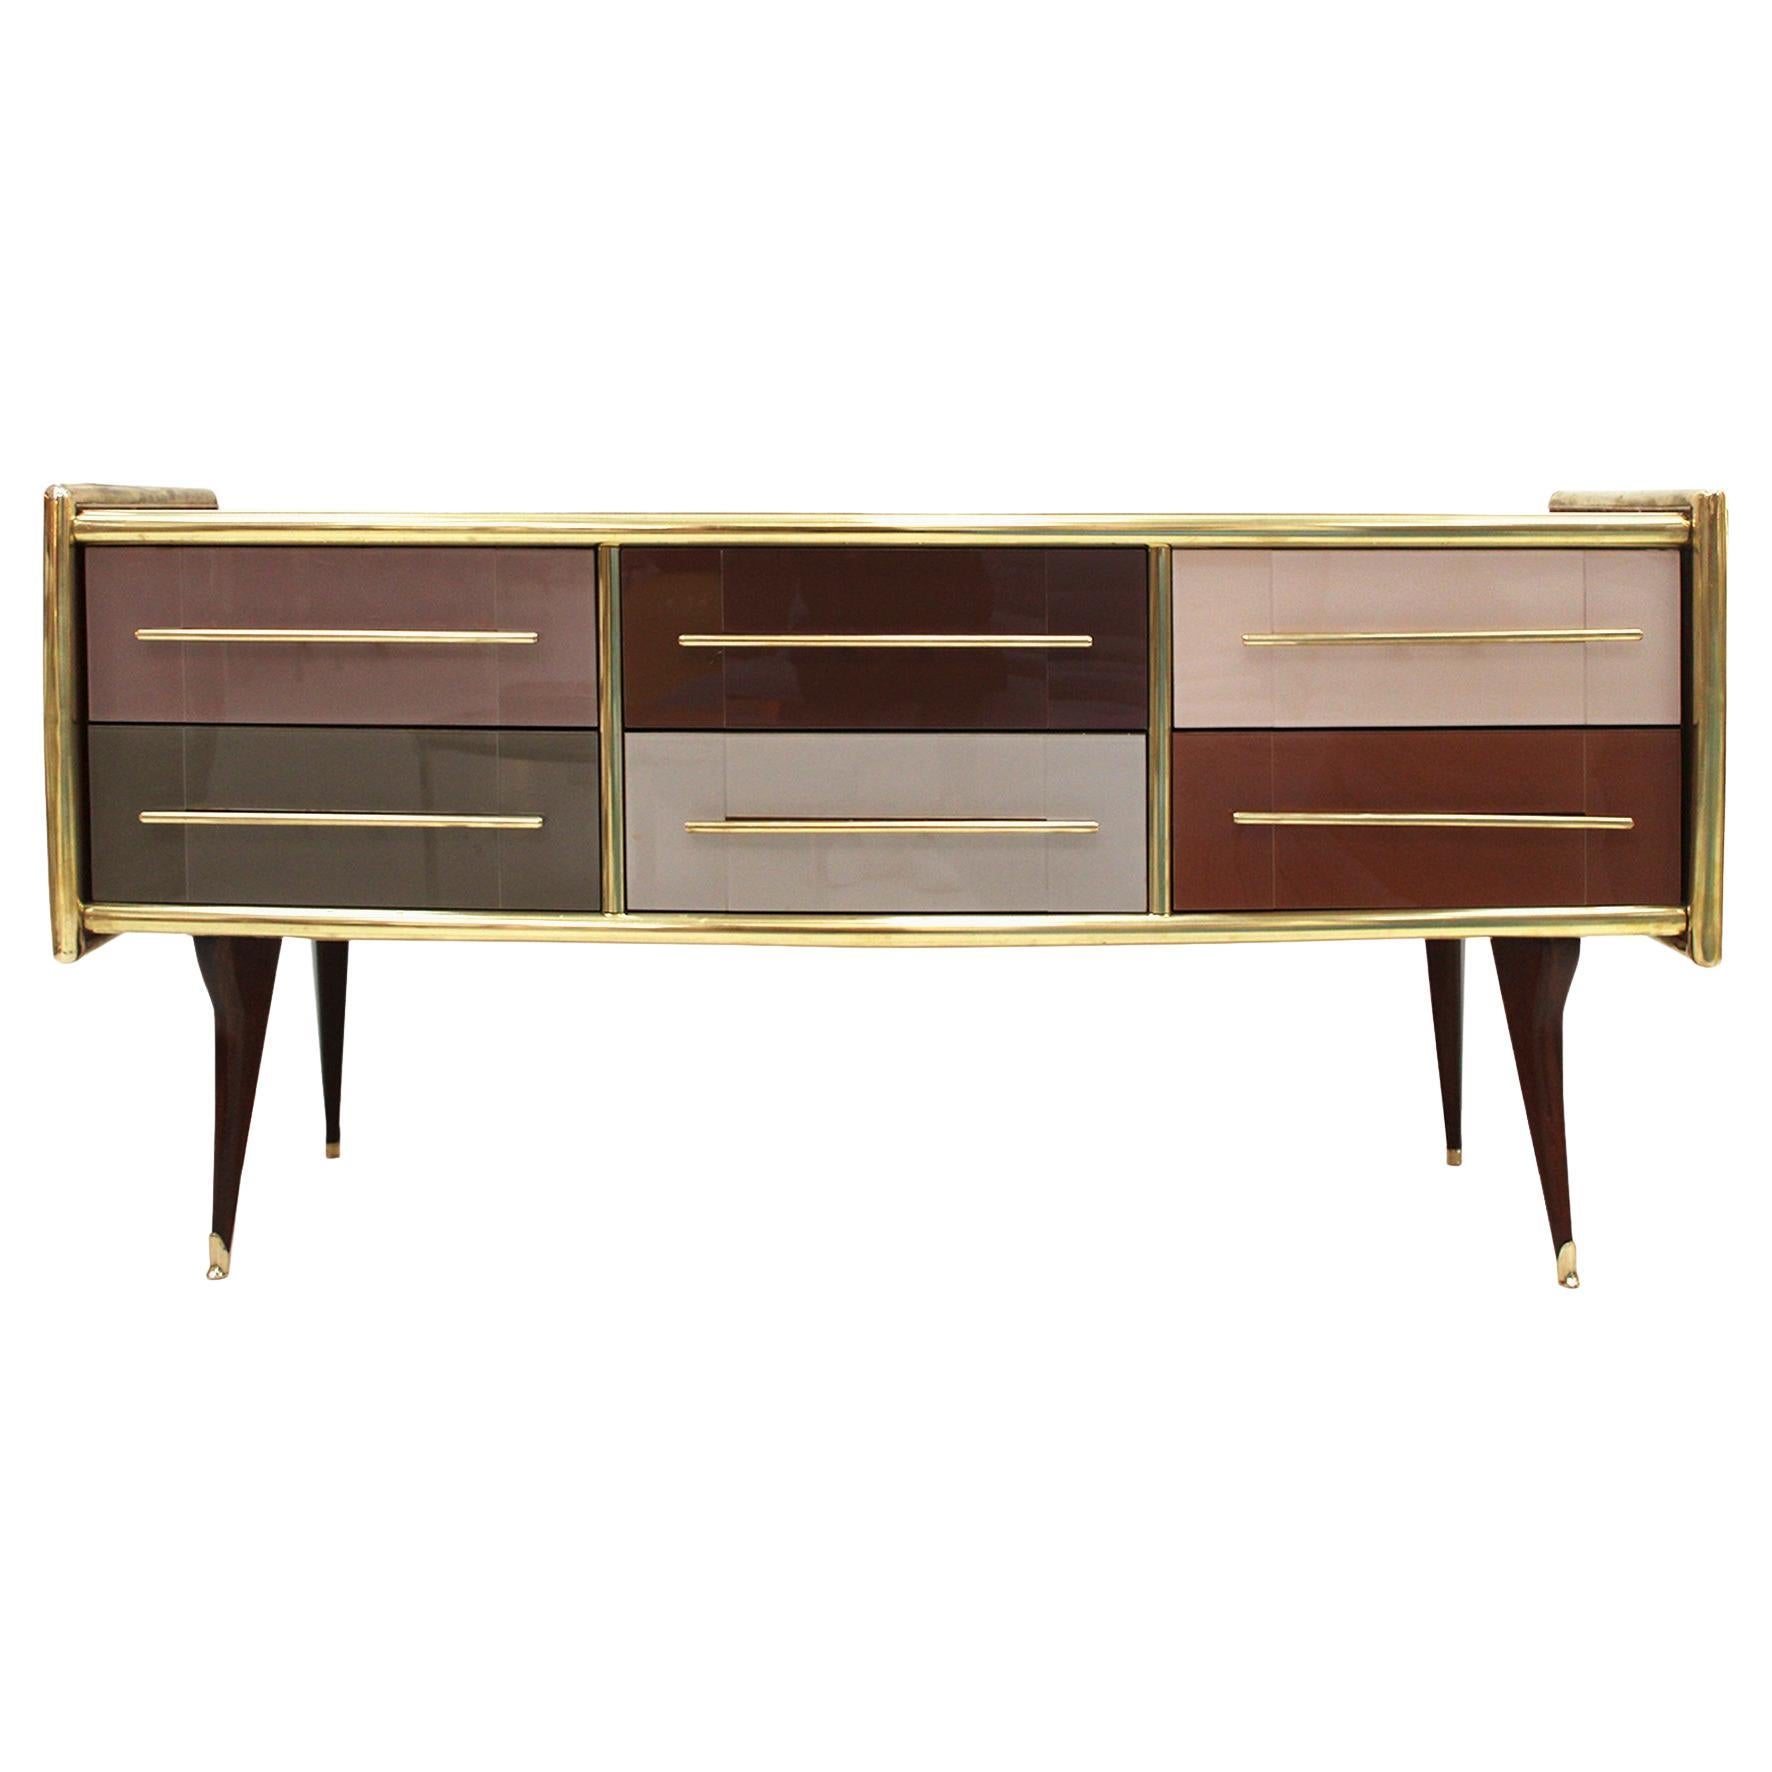 Mid-Century Modern Style Solid Wood and Colored Glass Italian Sideboard